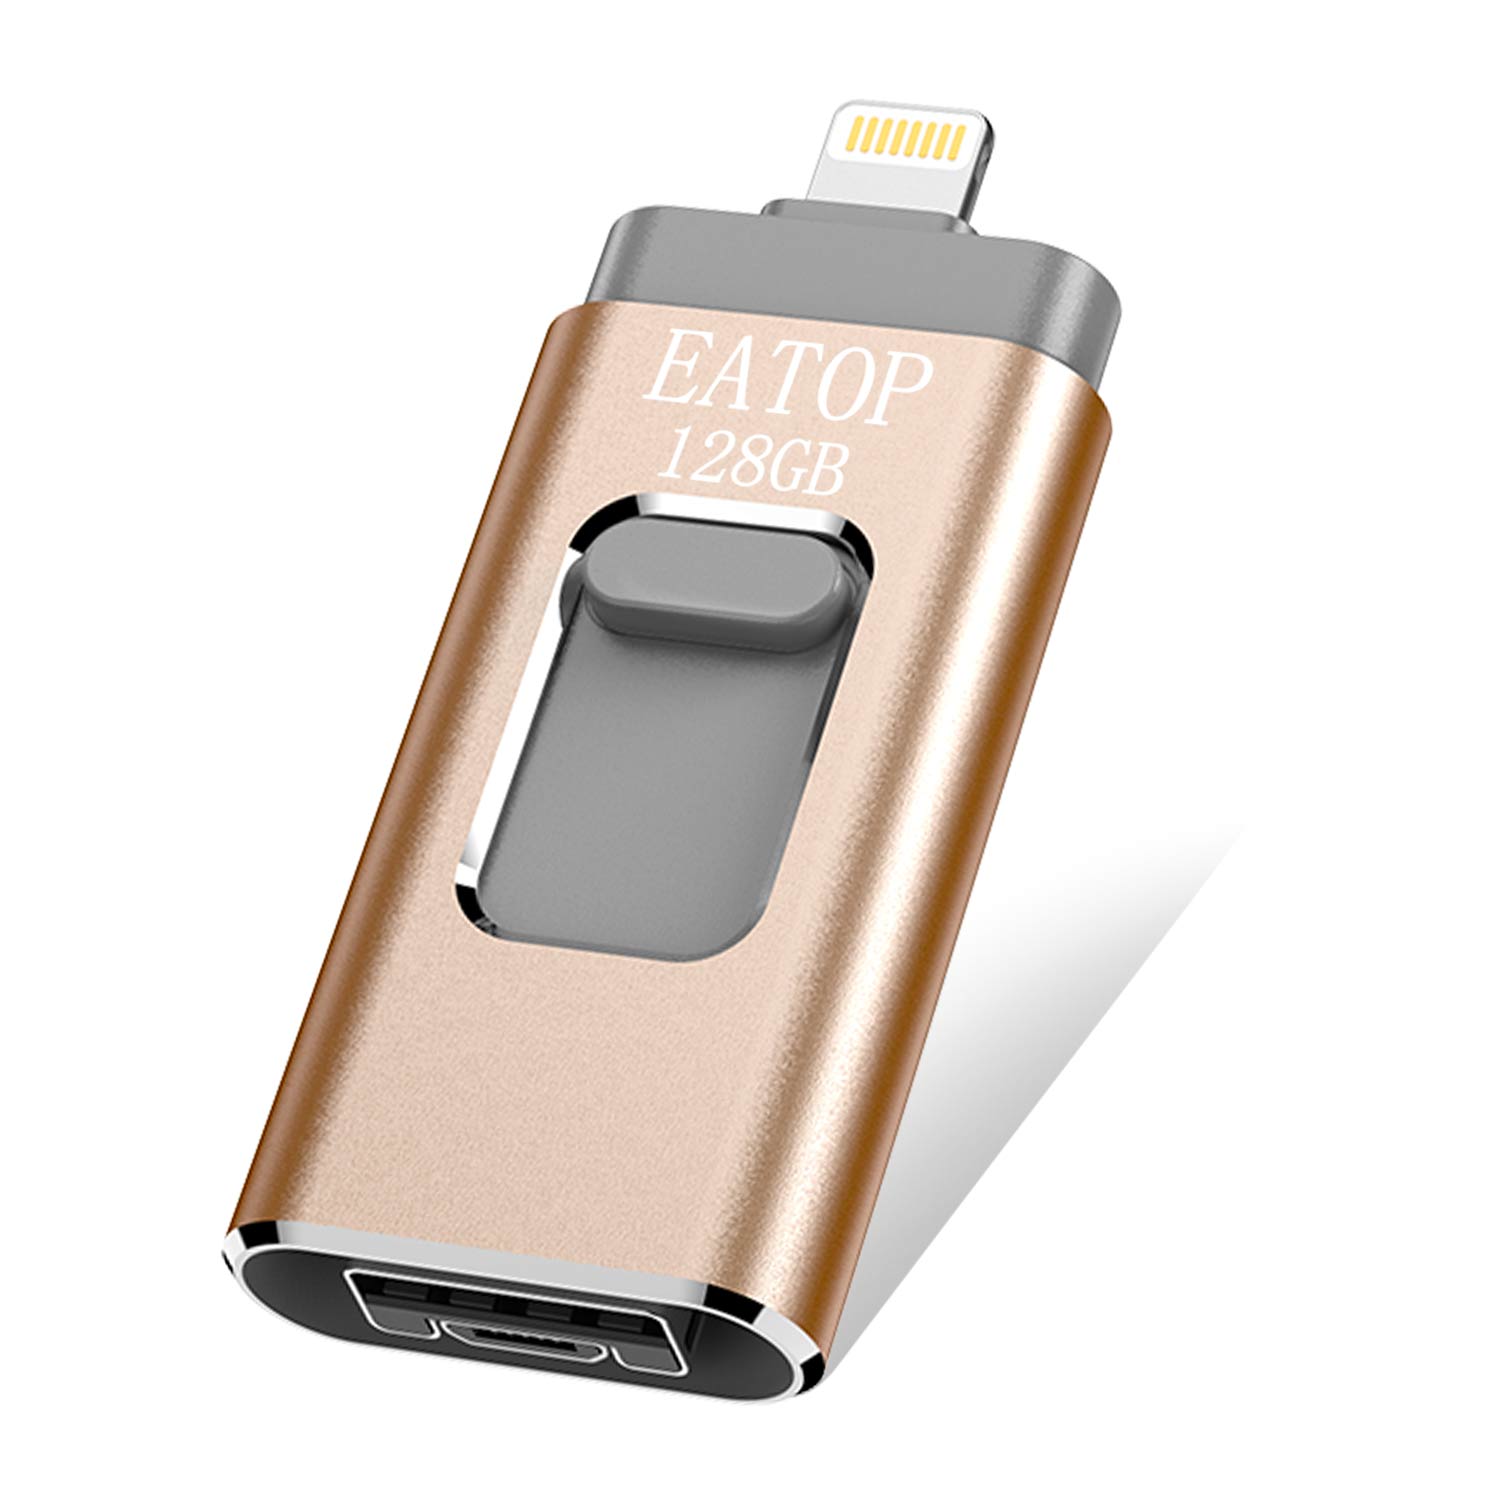 USB Flash Drives 128GB iPhone Memory Stick,EATOP External Storage Memory Stick Adapter Expansion for iPod / iPhone / iPad / Android & Computers (Gold)